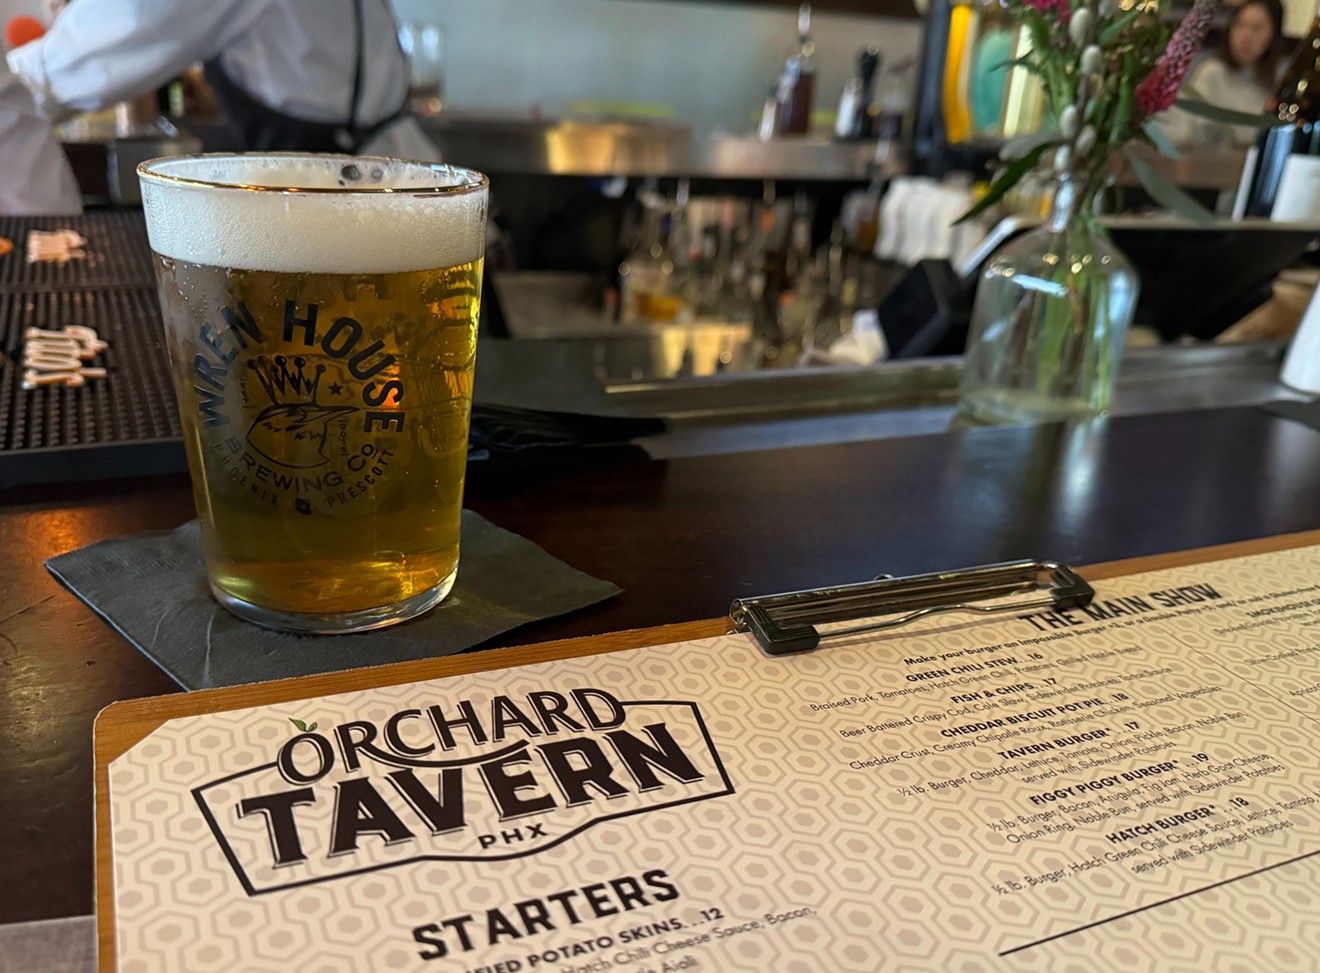 Orchard Tavern provides a casual, cozy spot for dinner and a beer.